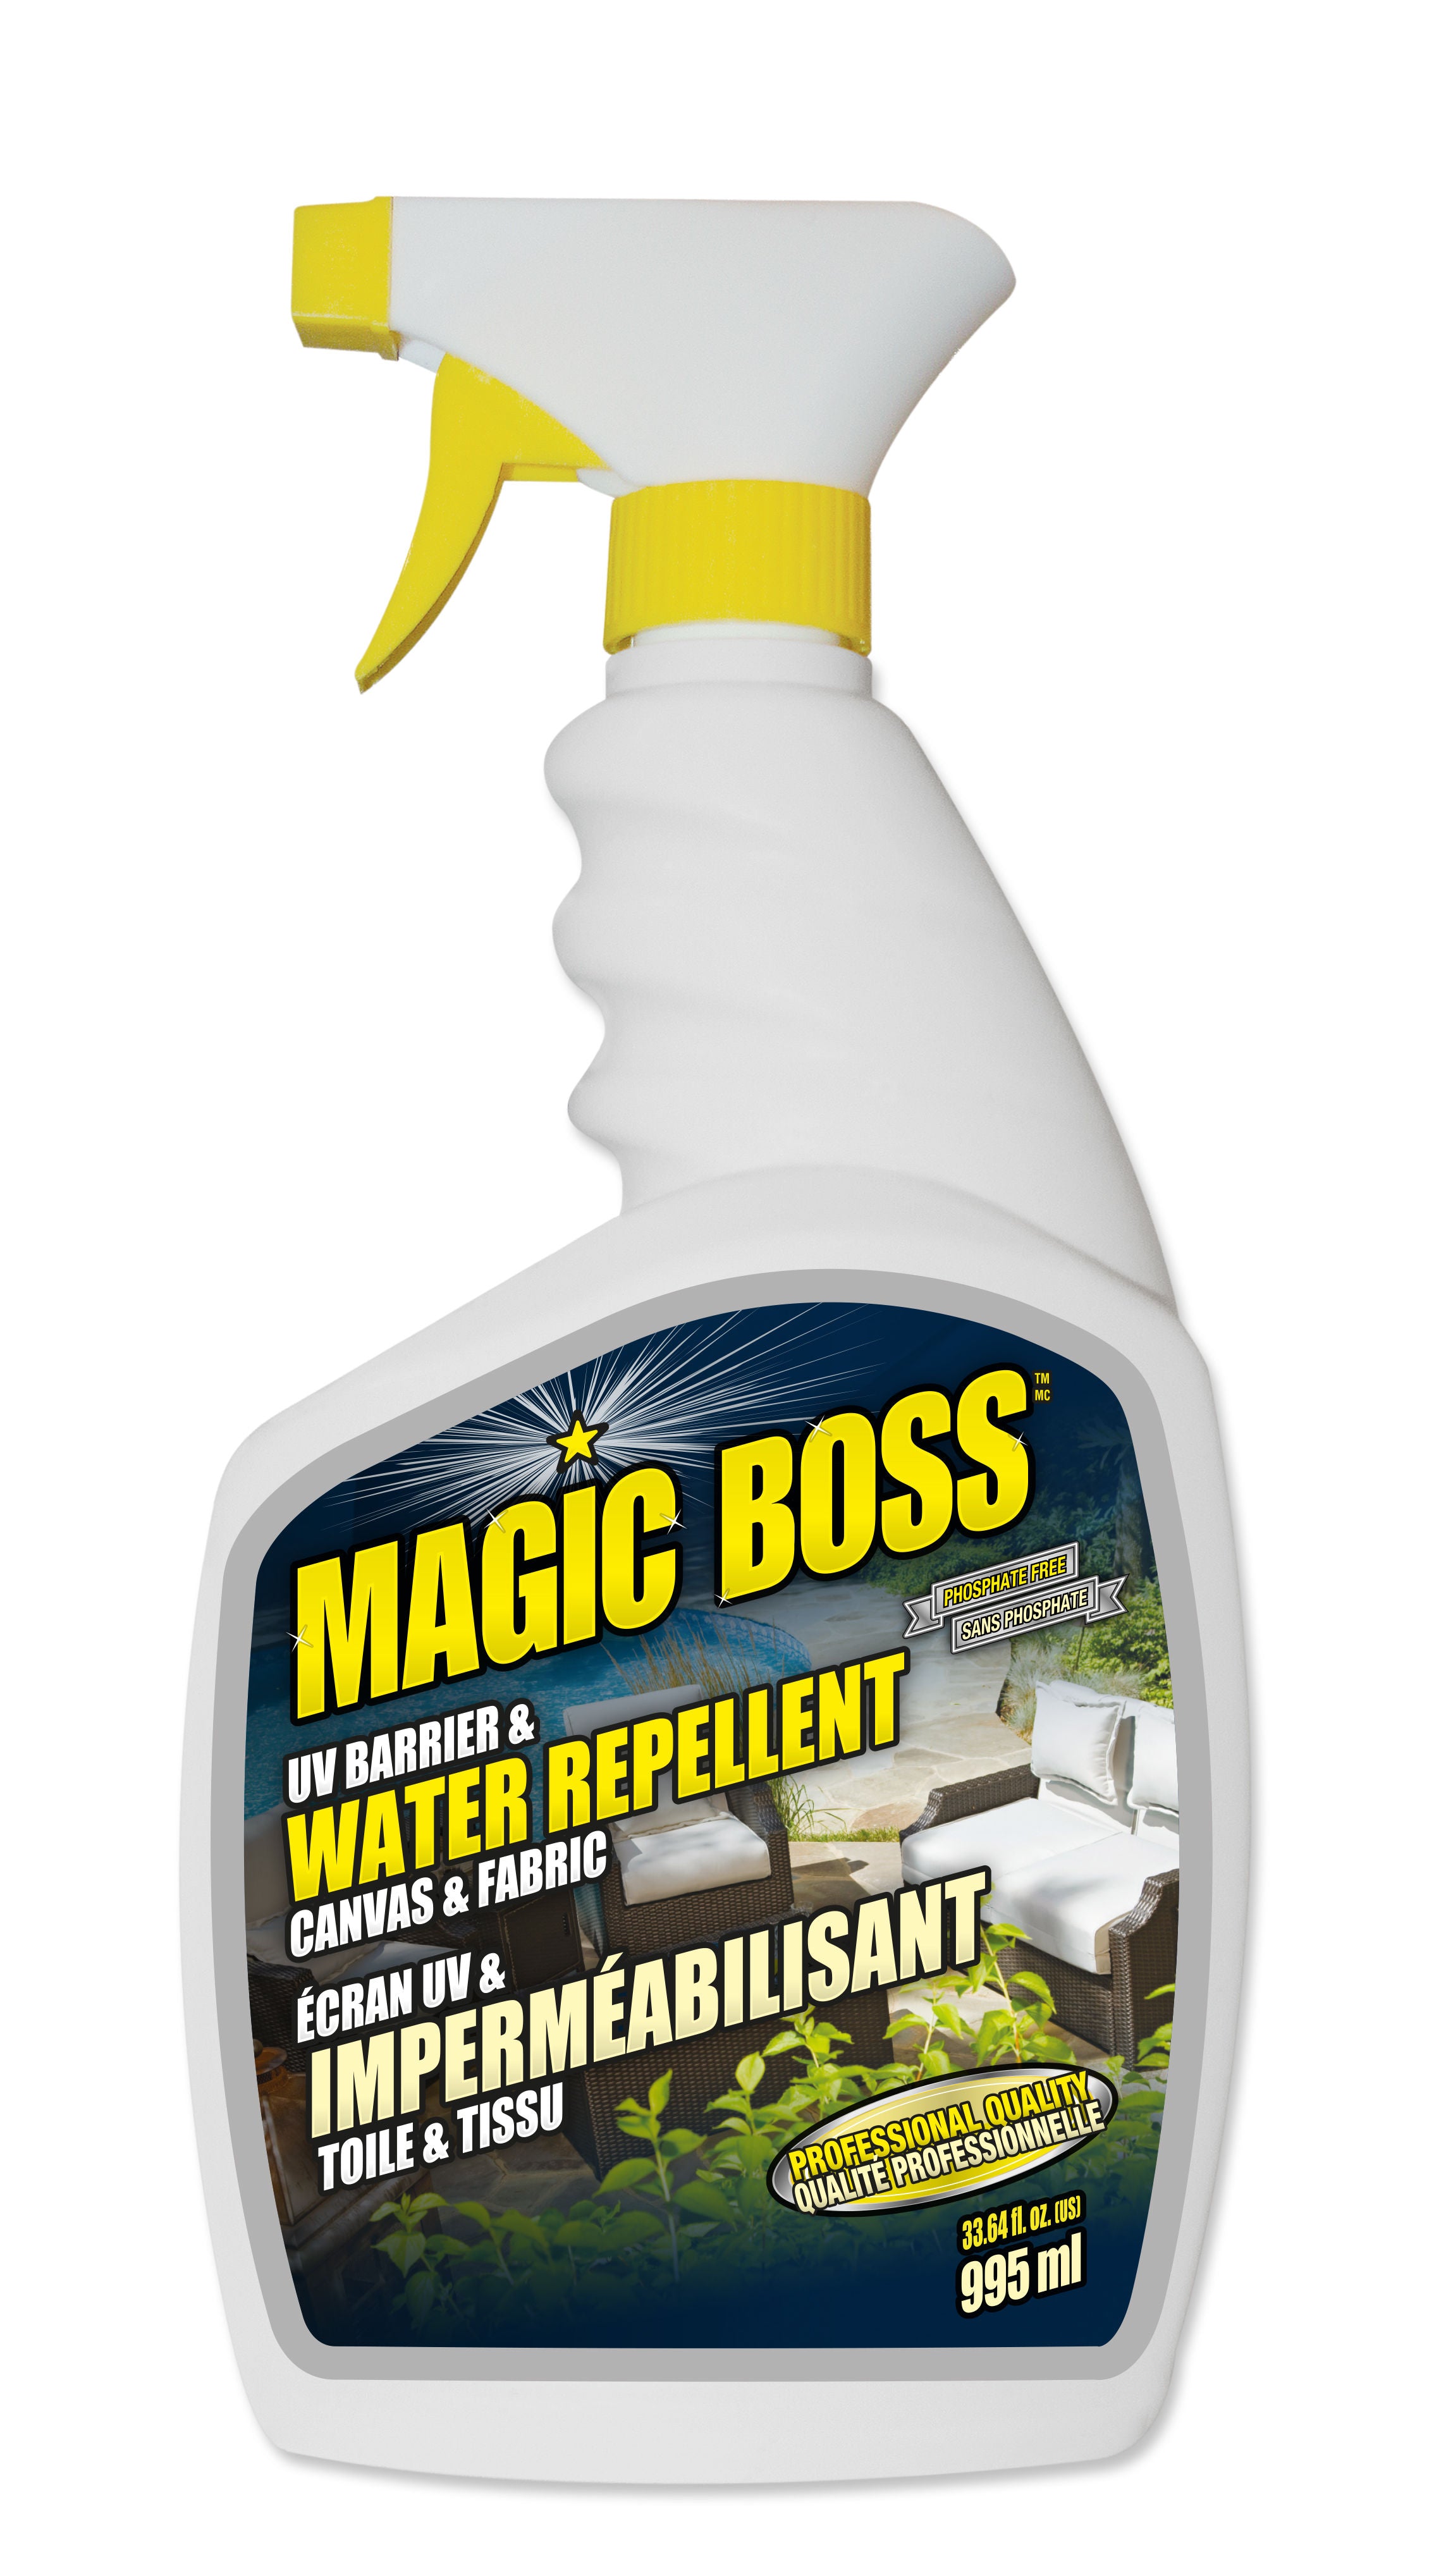 Magic Boss P1100 - UV Barrier & Water Repellent for Canvas & Fabric (995 ml)